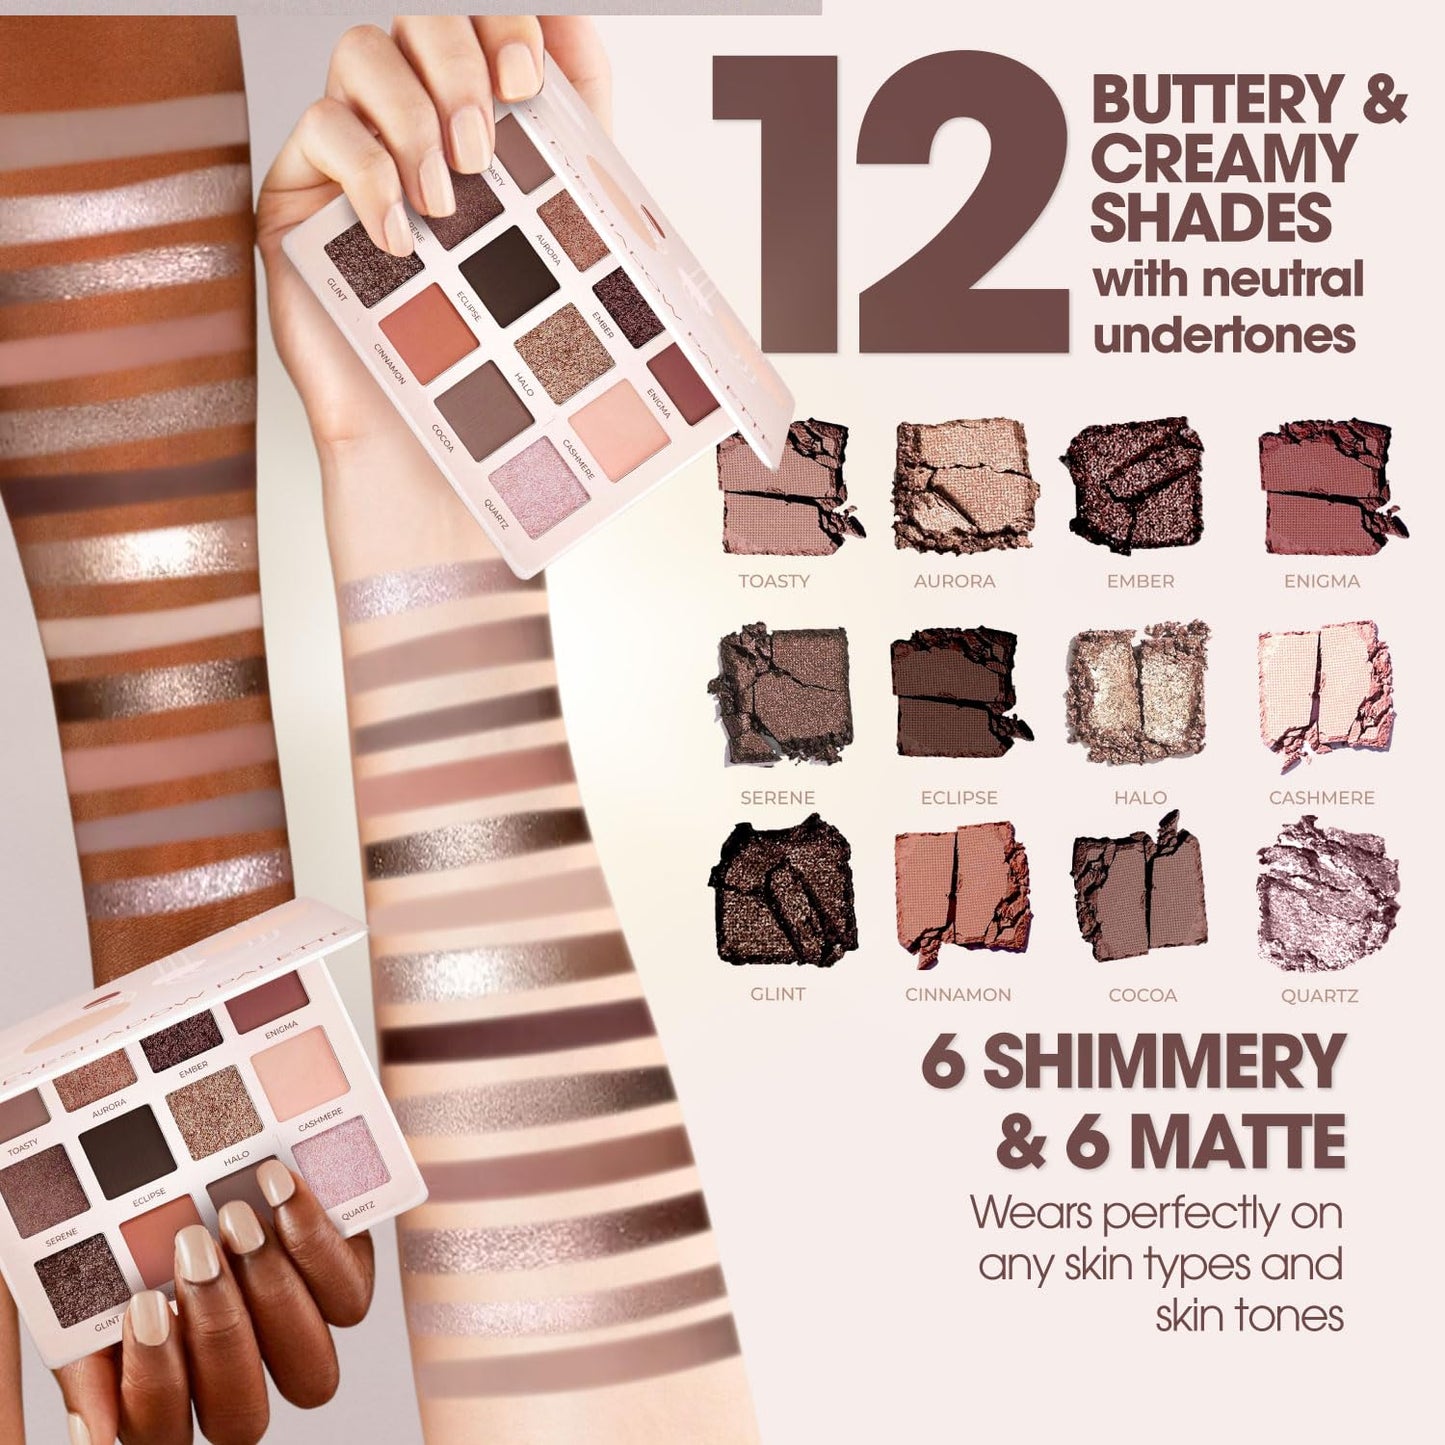 Lamora Nude Eyeshadow Palette Makeup - 12 Neutral Pigmented Matte & Shimmer Shades - Travel Size Eye Shadow With Mirror